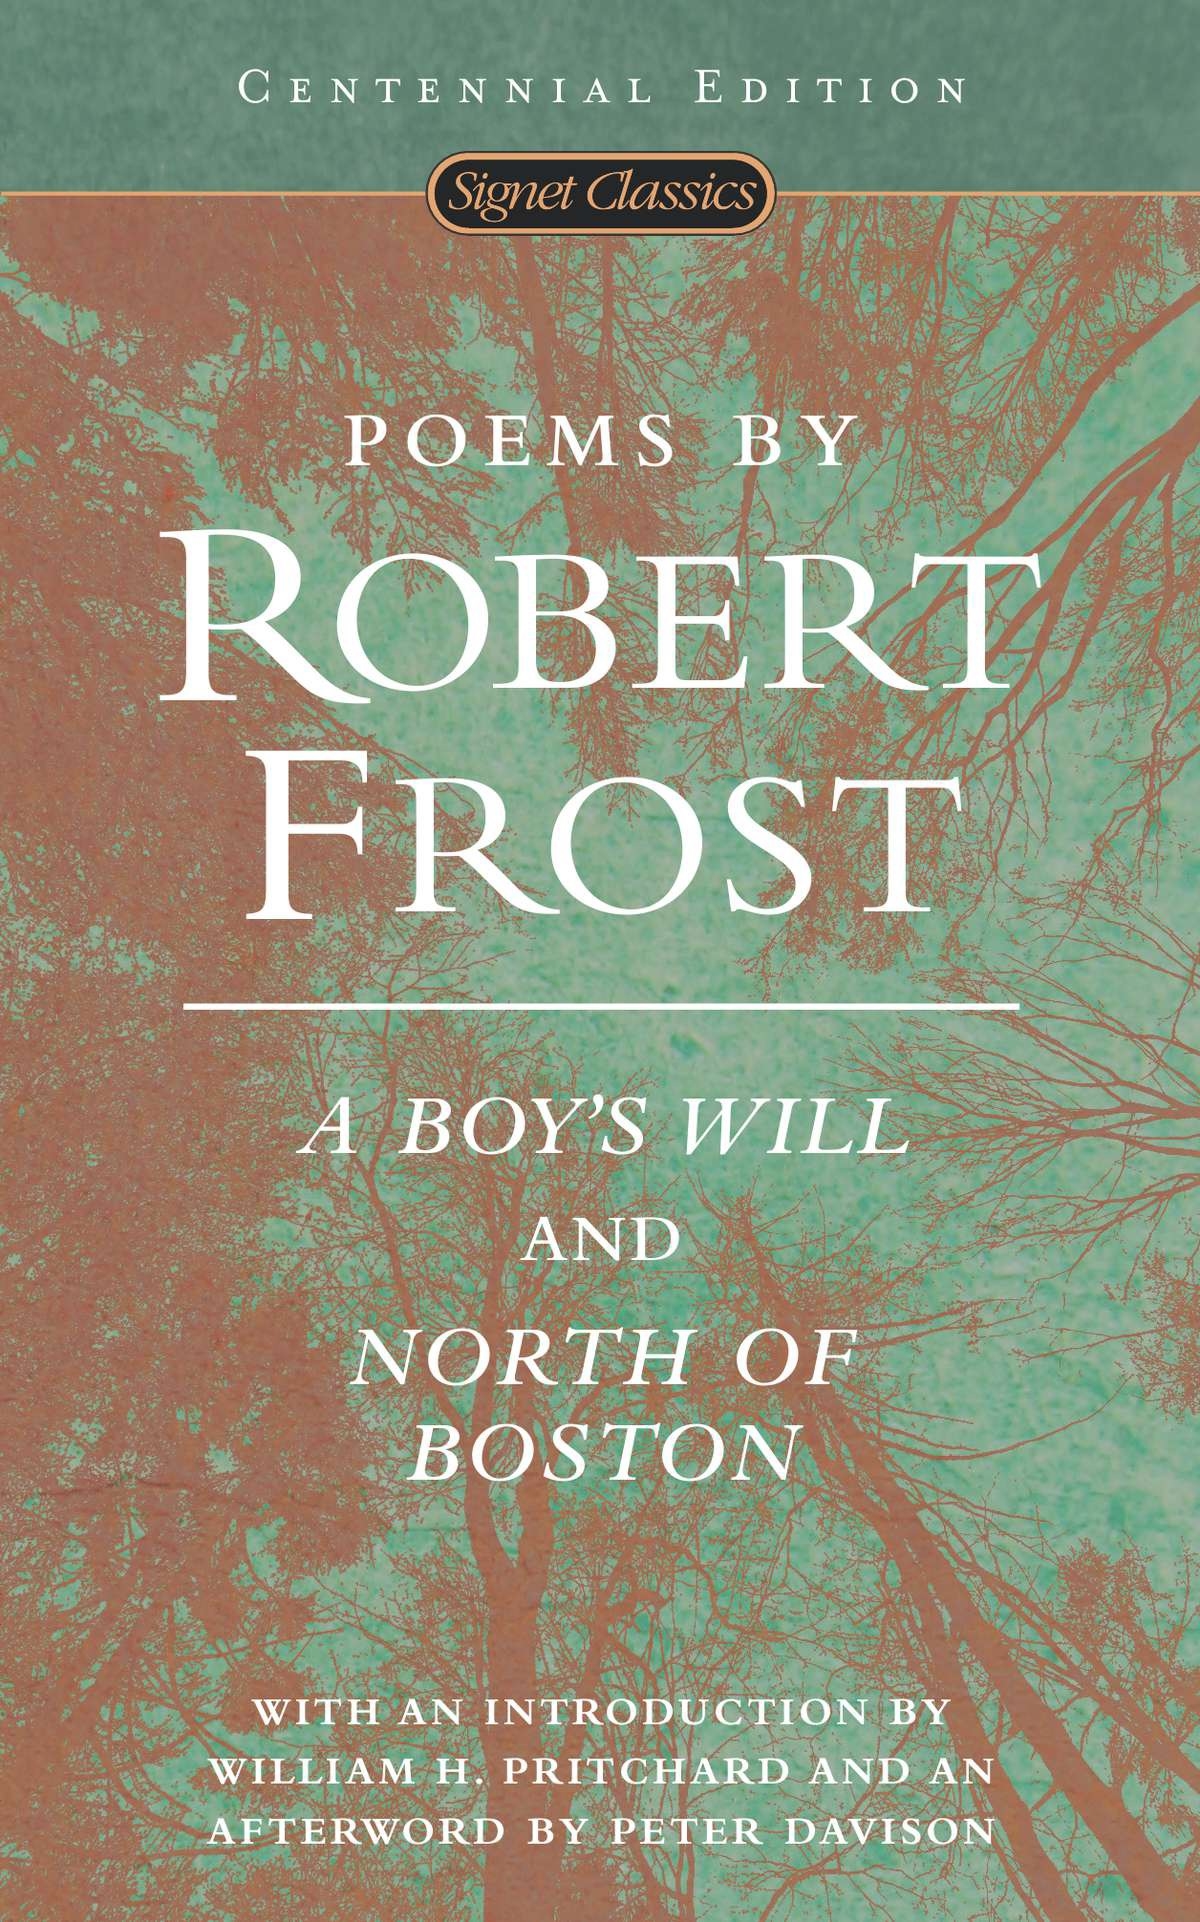 The tree poem by robert frost - daxlive